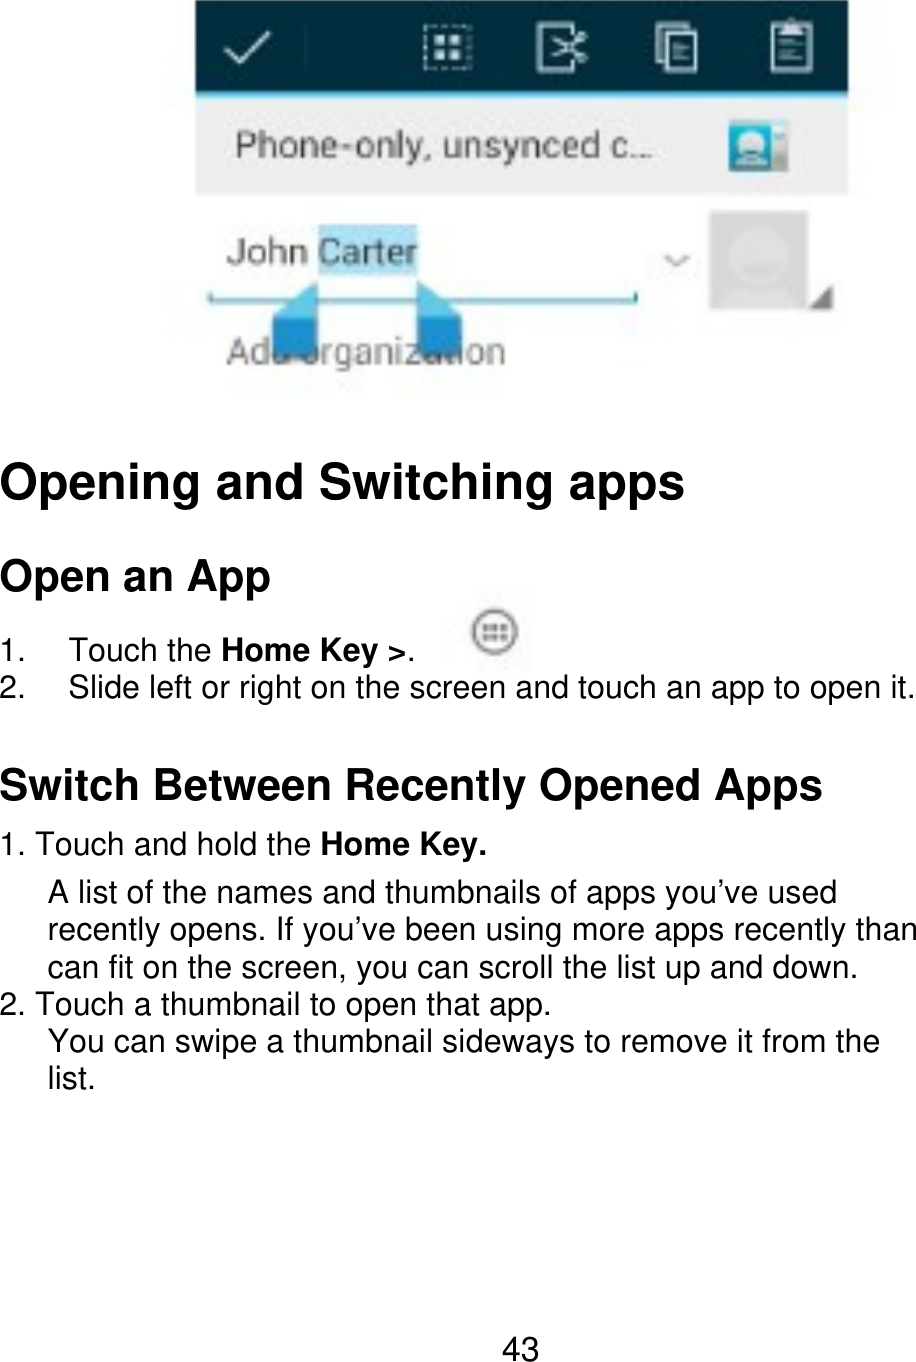 Opening and Switching apps Open an App 1. 2. Touch the Home Key &gt;. Slide left or right on the screen and touch an app to open it. Switch Between Recently Opened Apps 1. Touch and hold the Home Key.       A list of the names and thumbnails of apps you’ve used       recently opens. If you’ve been using more apps recently than    can fit on the screen, you can scroll the list up and down. 2. Touch a thumbnail to open that app.       You can swipe a thumbnail sideways to remove it from the    list. 43 